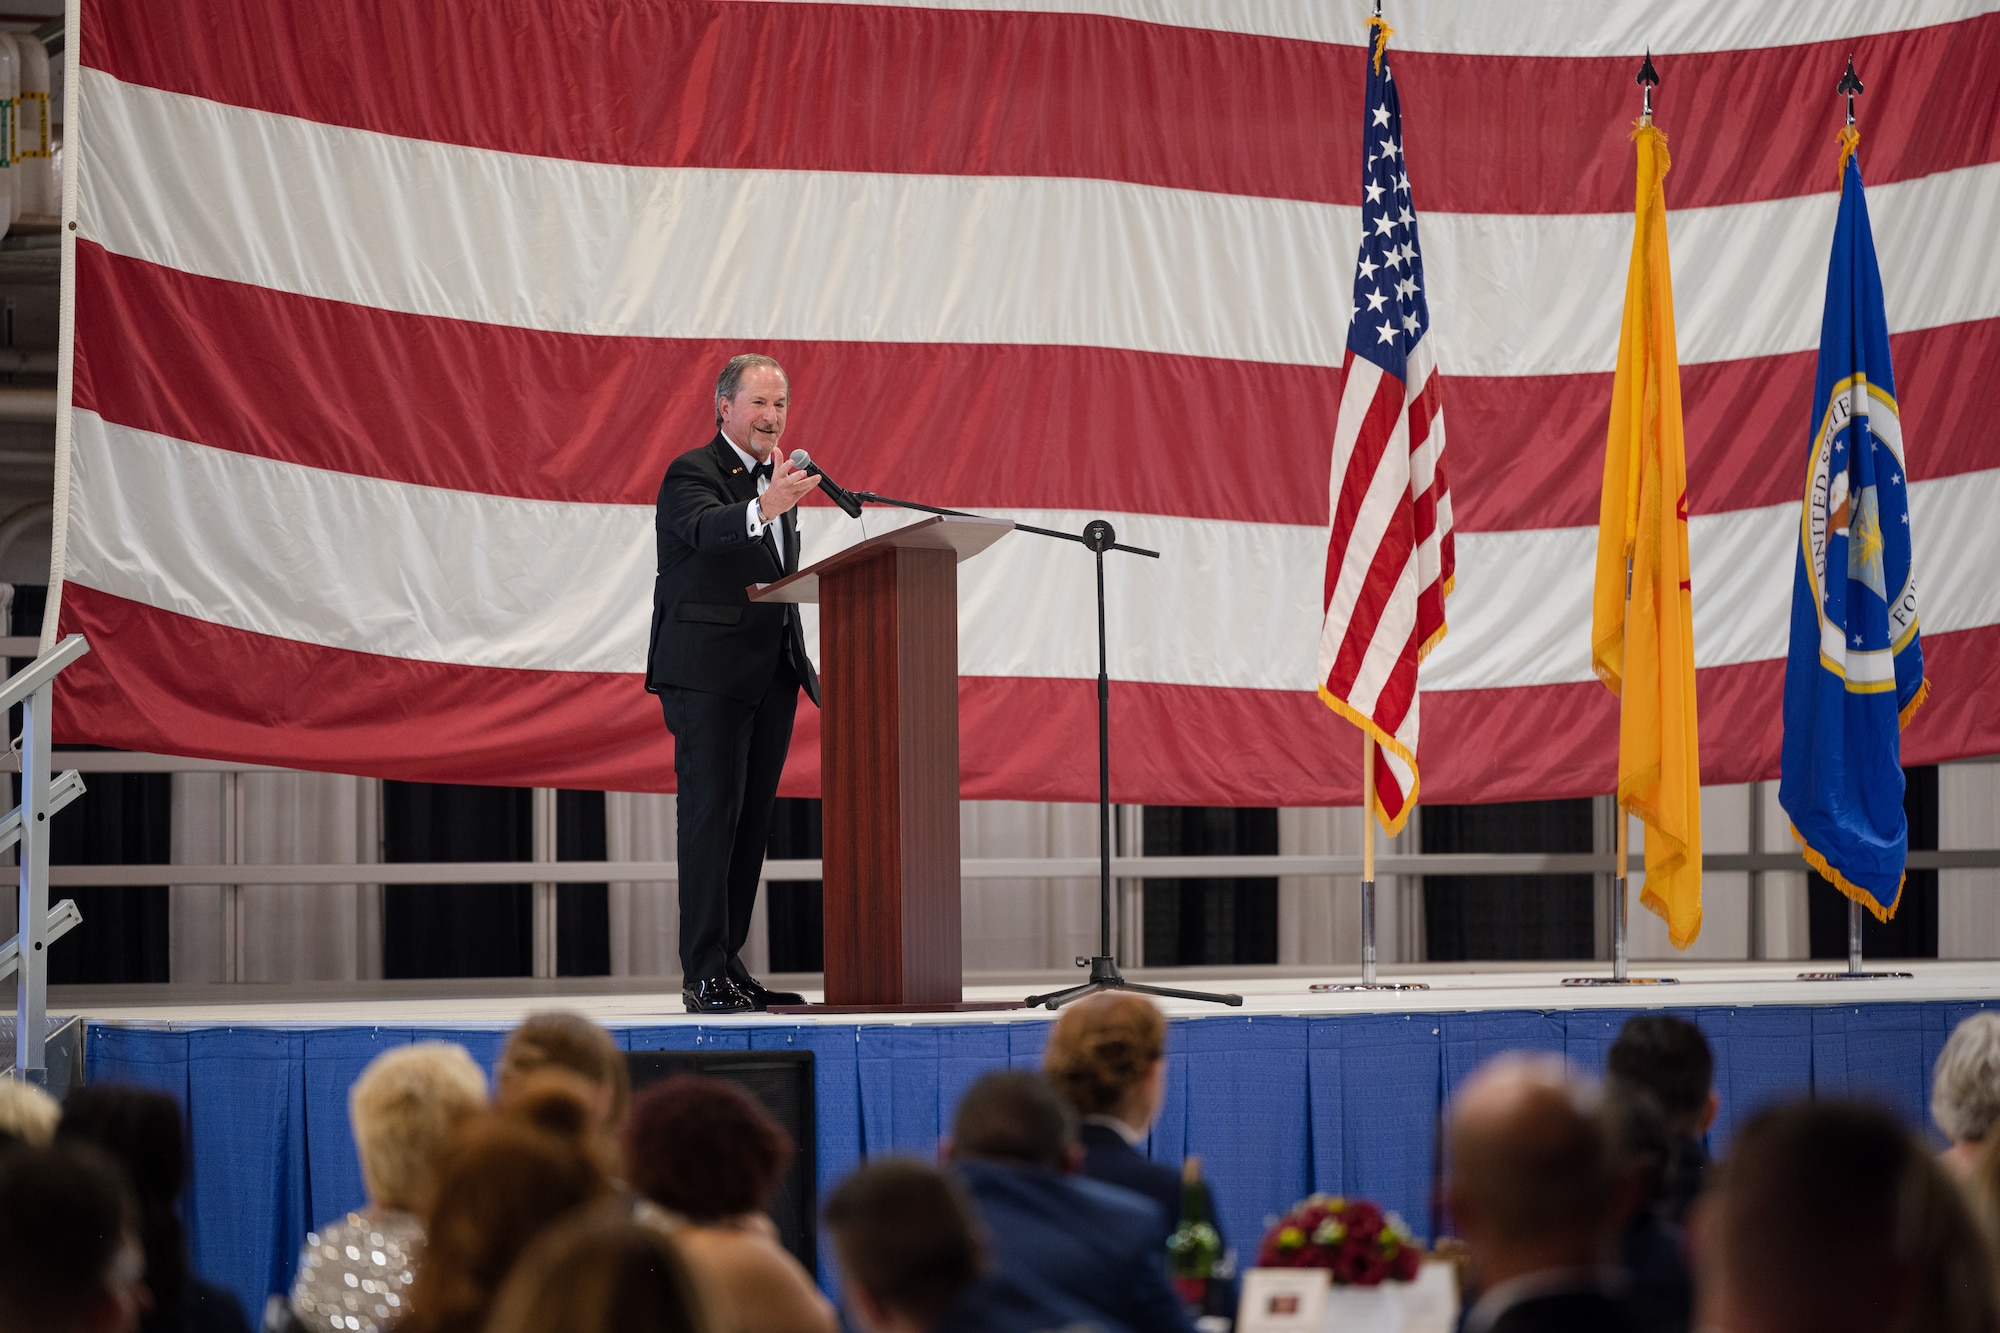 Retired U.S. Air Force Gen. David L. Goldfein gives remarks during the 2023 Holloman Air Force Ball at Holloman Air Force Base, New Mexico, Sept. 23, 2023. In June of 2006, Goldfein assumed command of the 49th Fighter Wing, which members of the current 49th Wing have decided to commemorate by having him attend the ball as the keynote speaker and naming a street in his honor. (U.S. Air Force photo by Senior Airman Antonio Salfran)